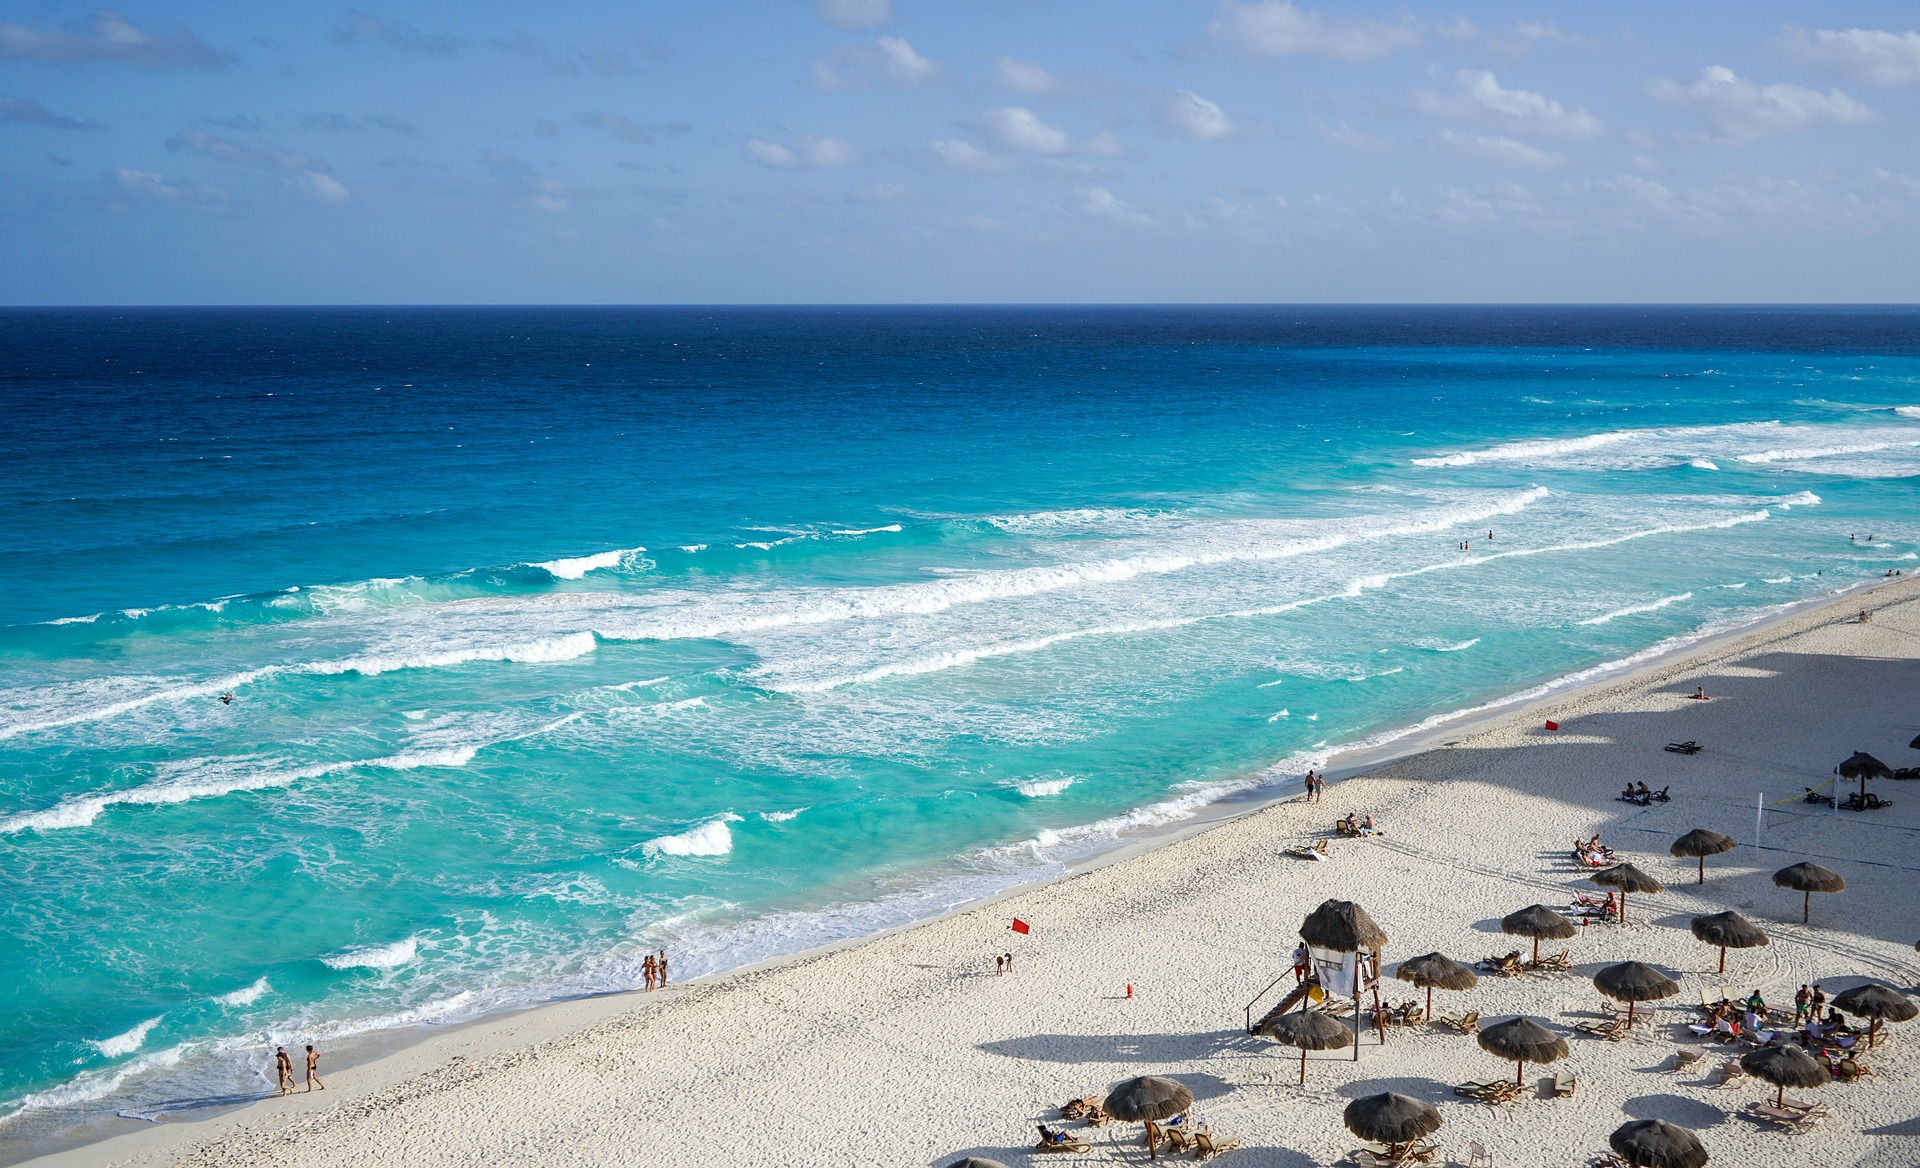 The Ultimate Packing List for Your Cancun All-Inclusive Vacation